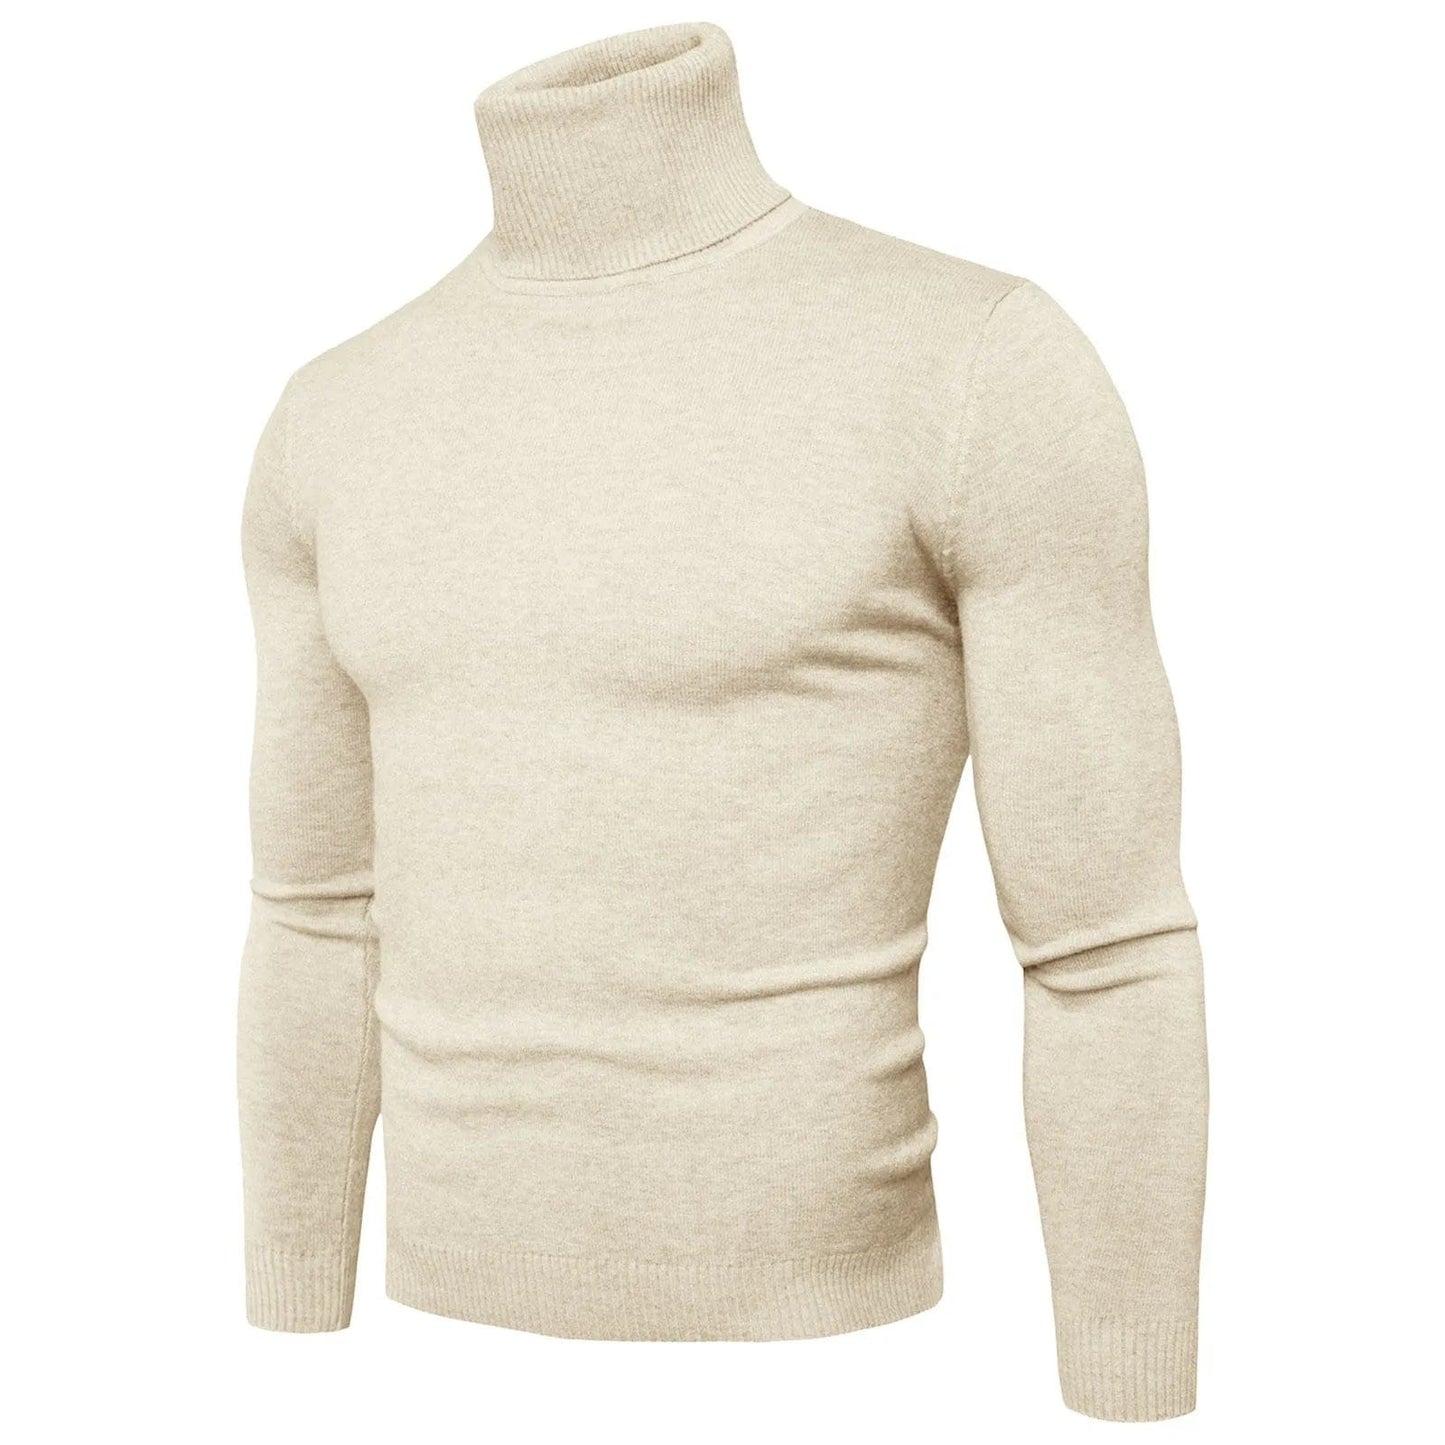 Men‘S Knitted Soft Turtleneck Sweater Solid Color Fitting Top Slim Mens Long Sleeve Pullover Autumn And Winter Casual Outfits